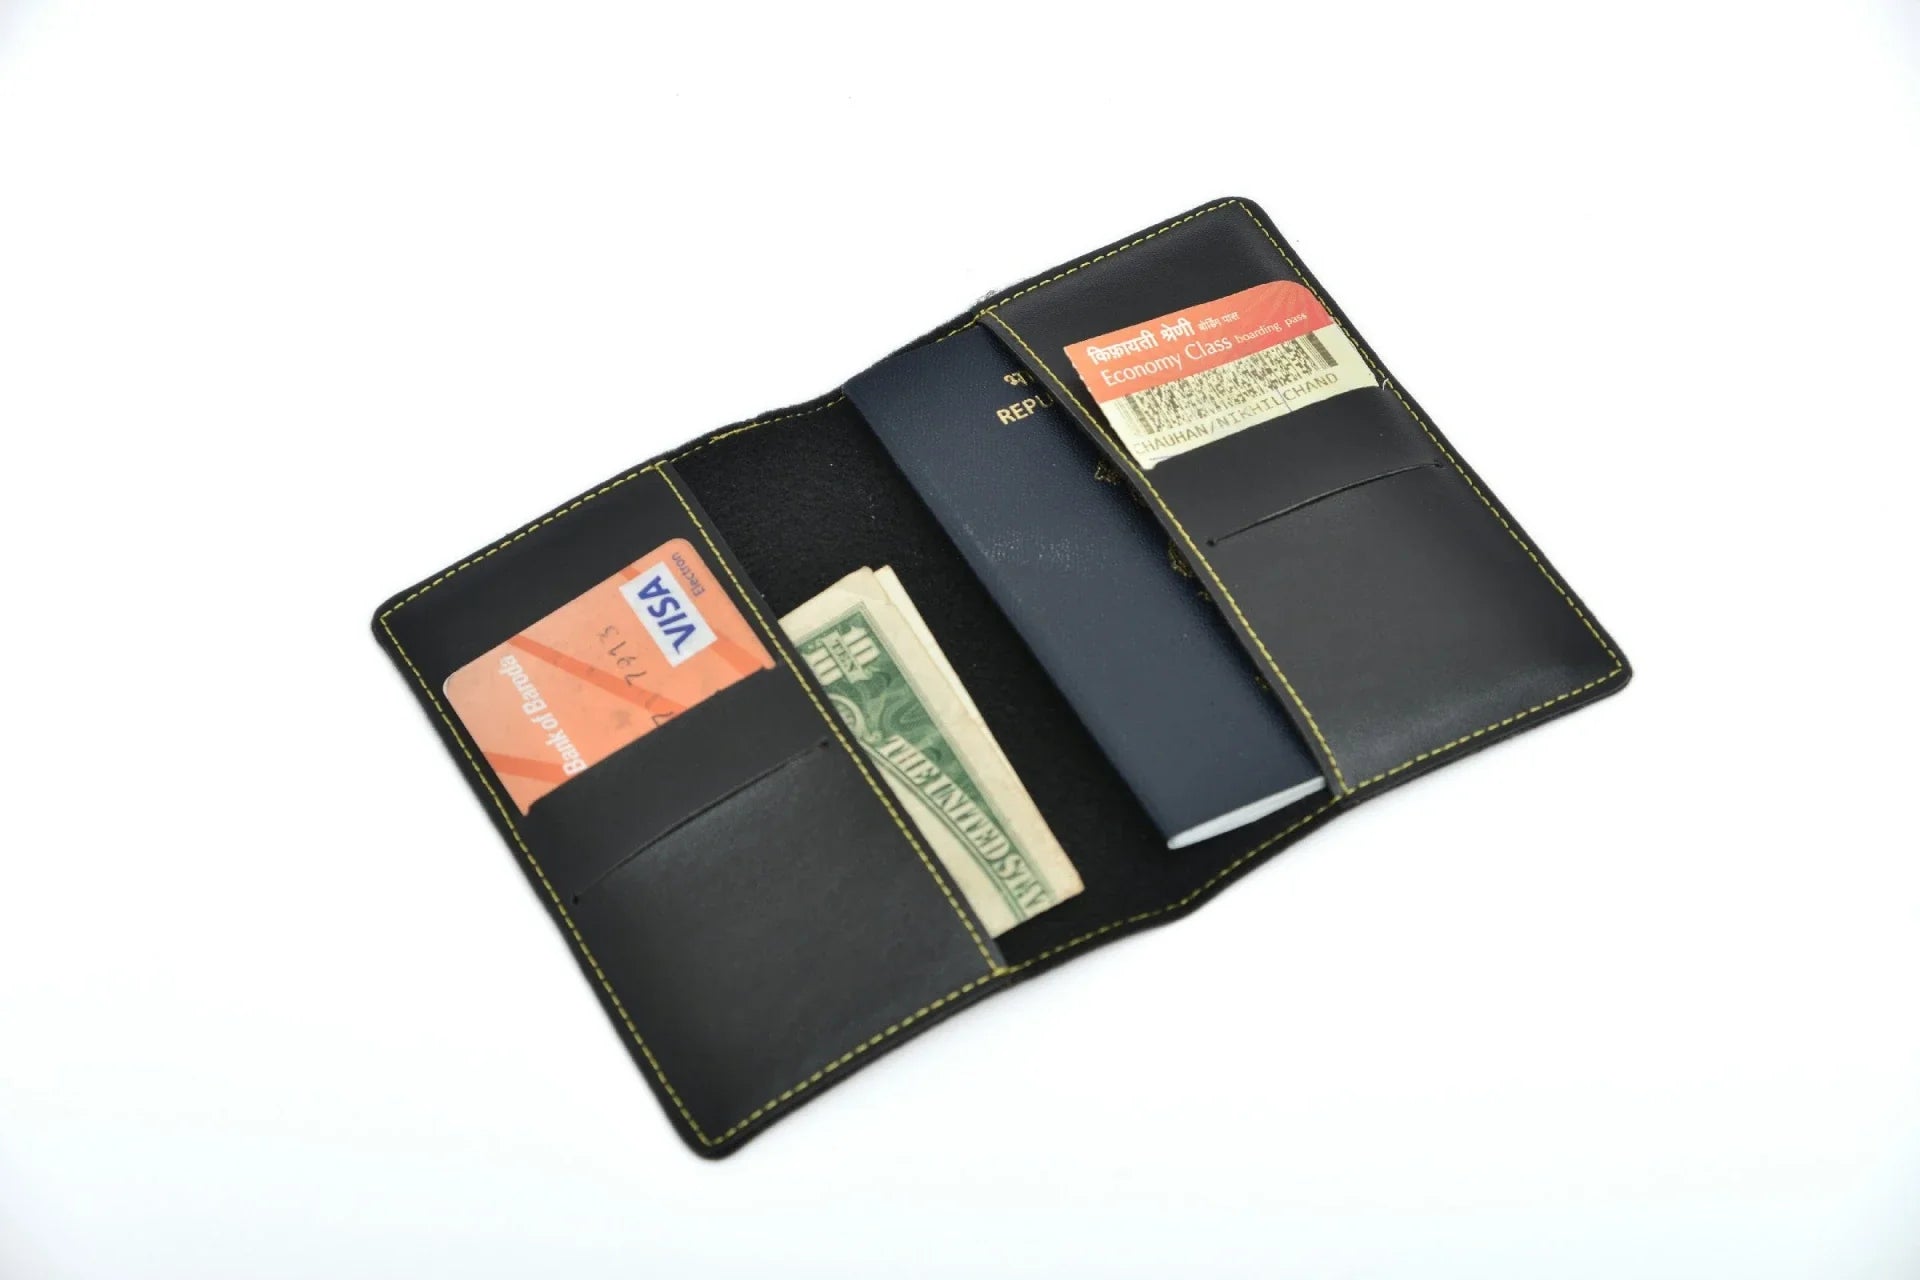 inside or open view of black passport case with a sturdy build and seamless finish